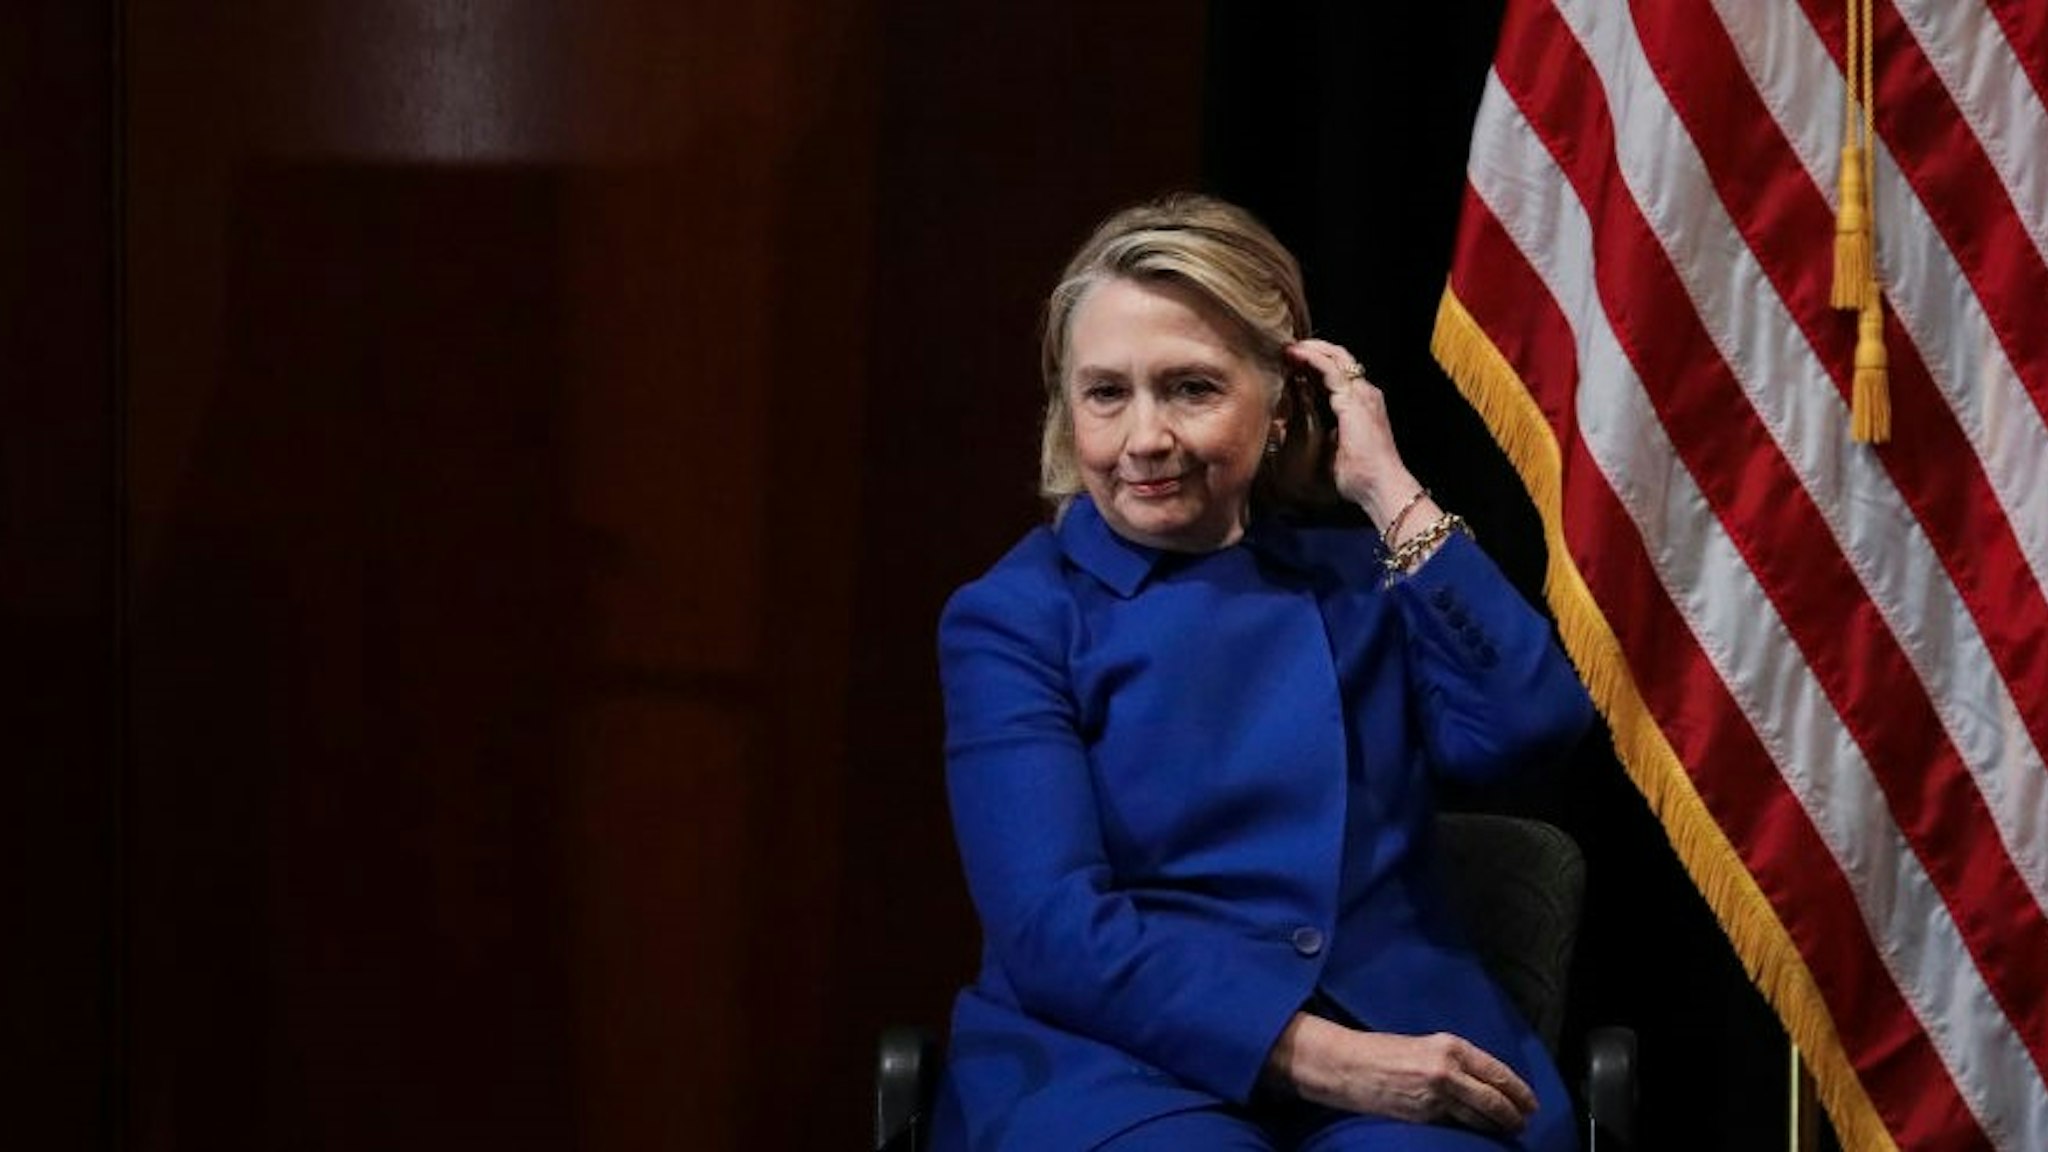 Former Secretary of State Hillary Clinton looks on during an event to discuss reproductive rights at Barnard College, January 7, 2019 in New York City.